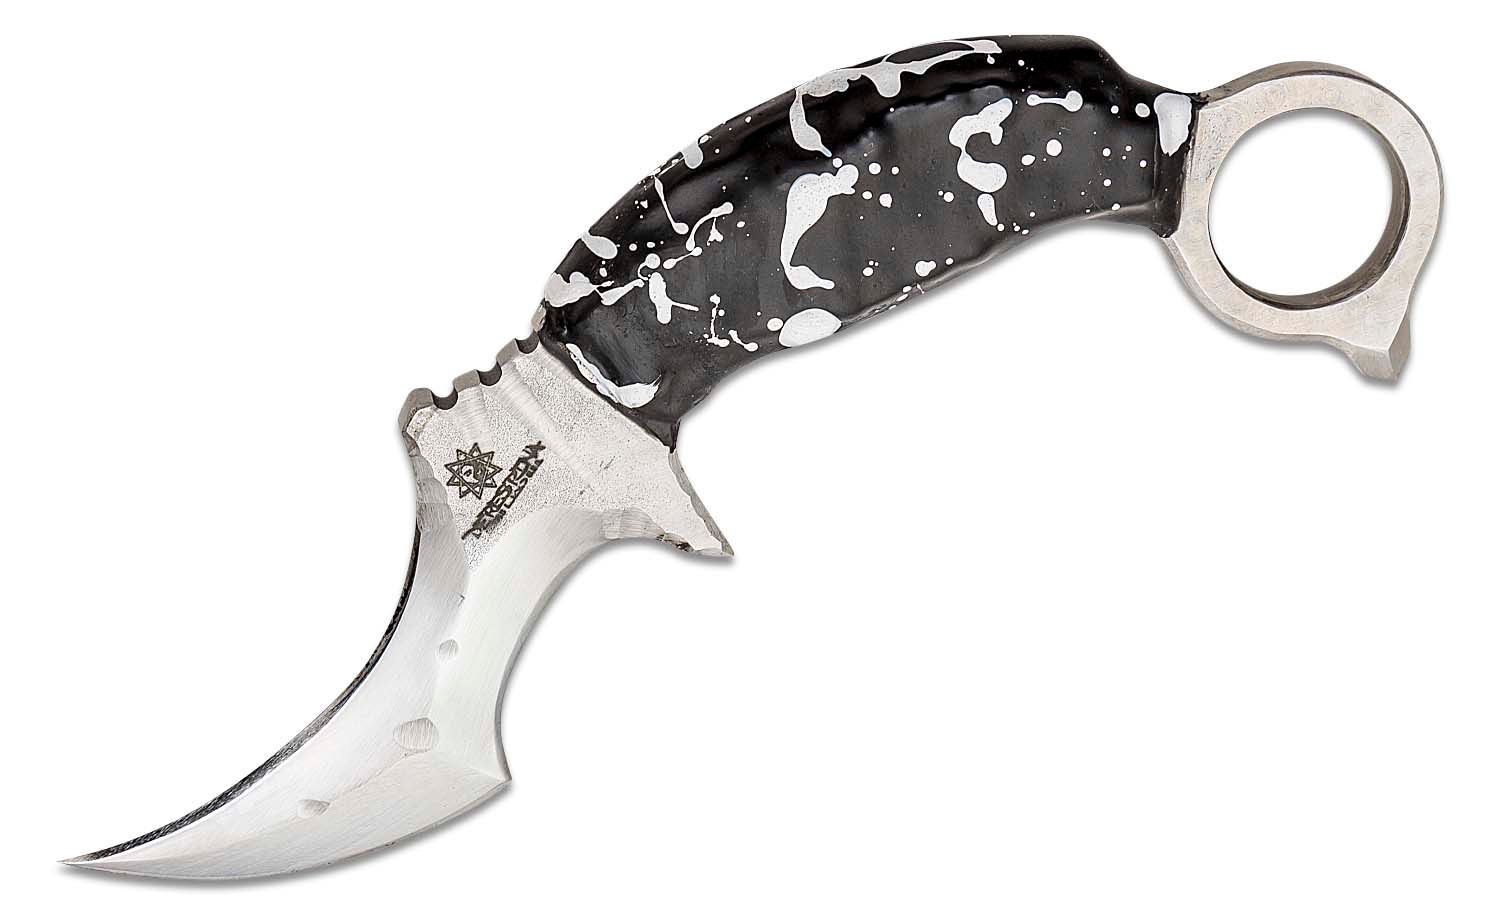 The Fang Leather Knife